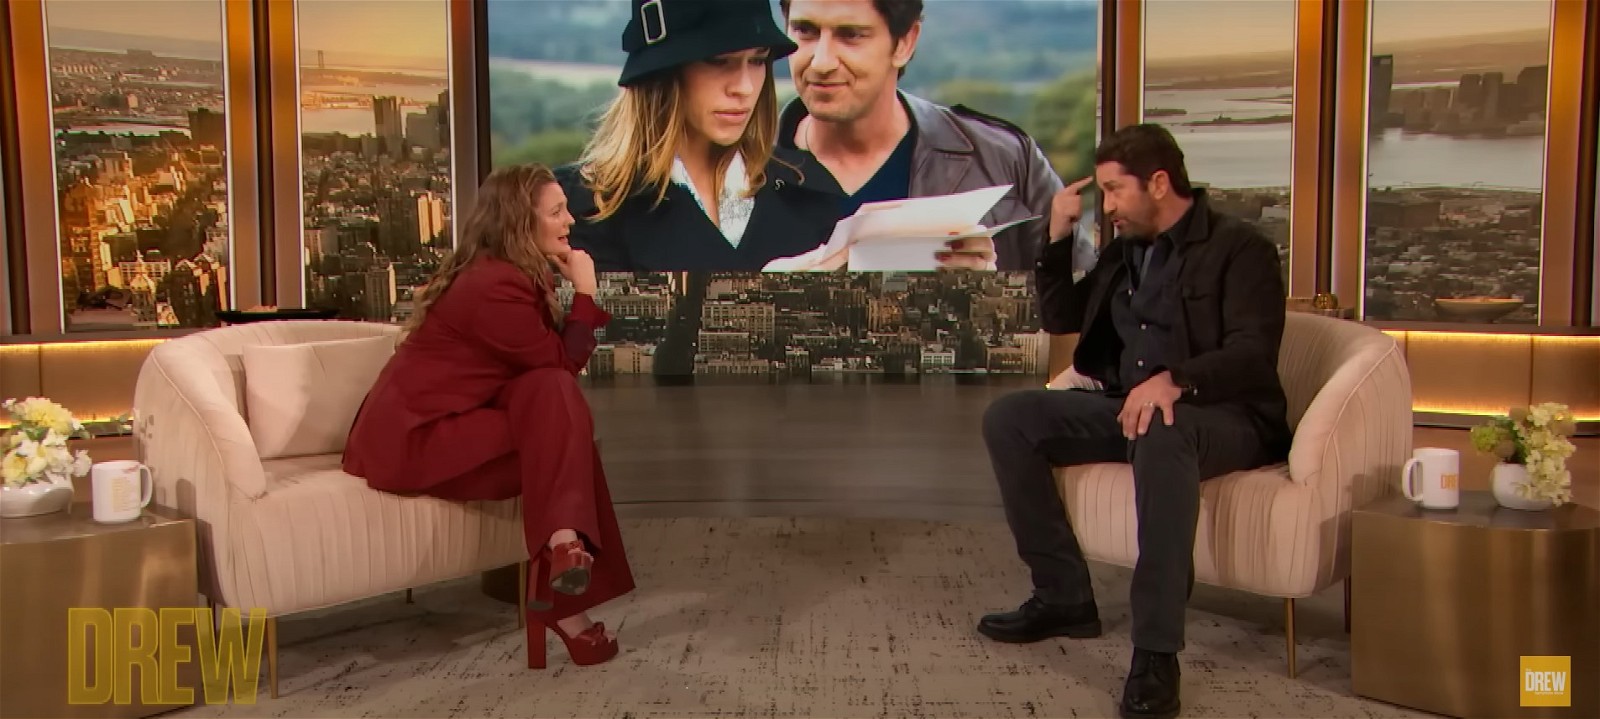 Gerard Butler on The Drew Barrymore Show